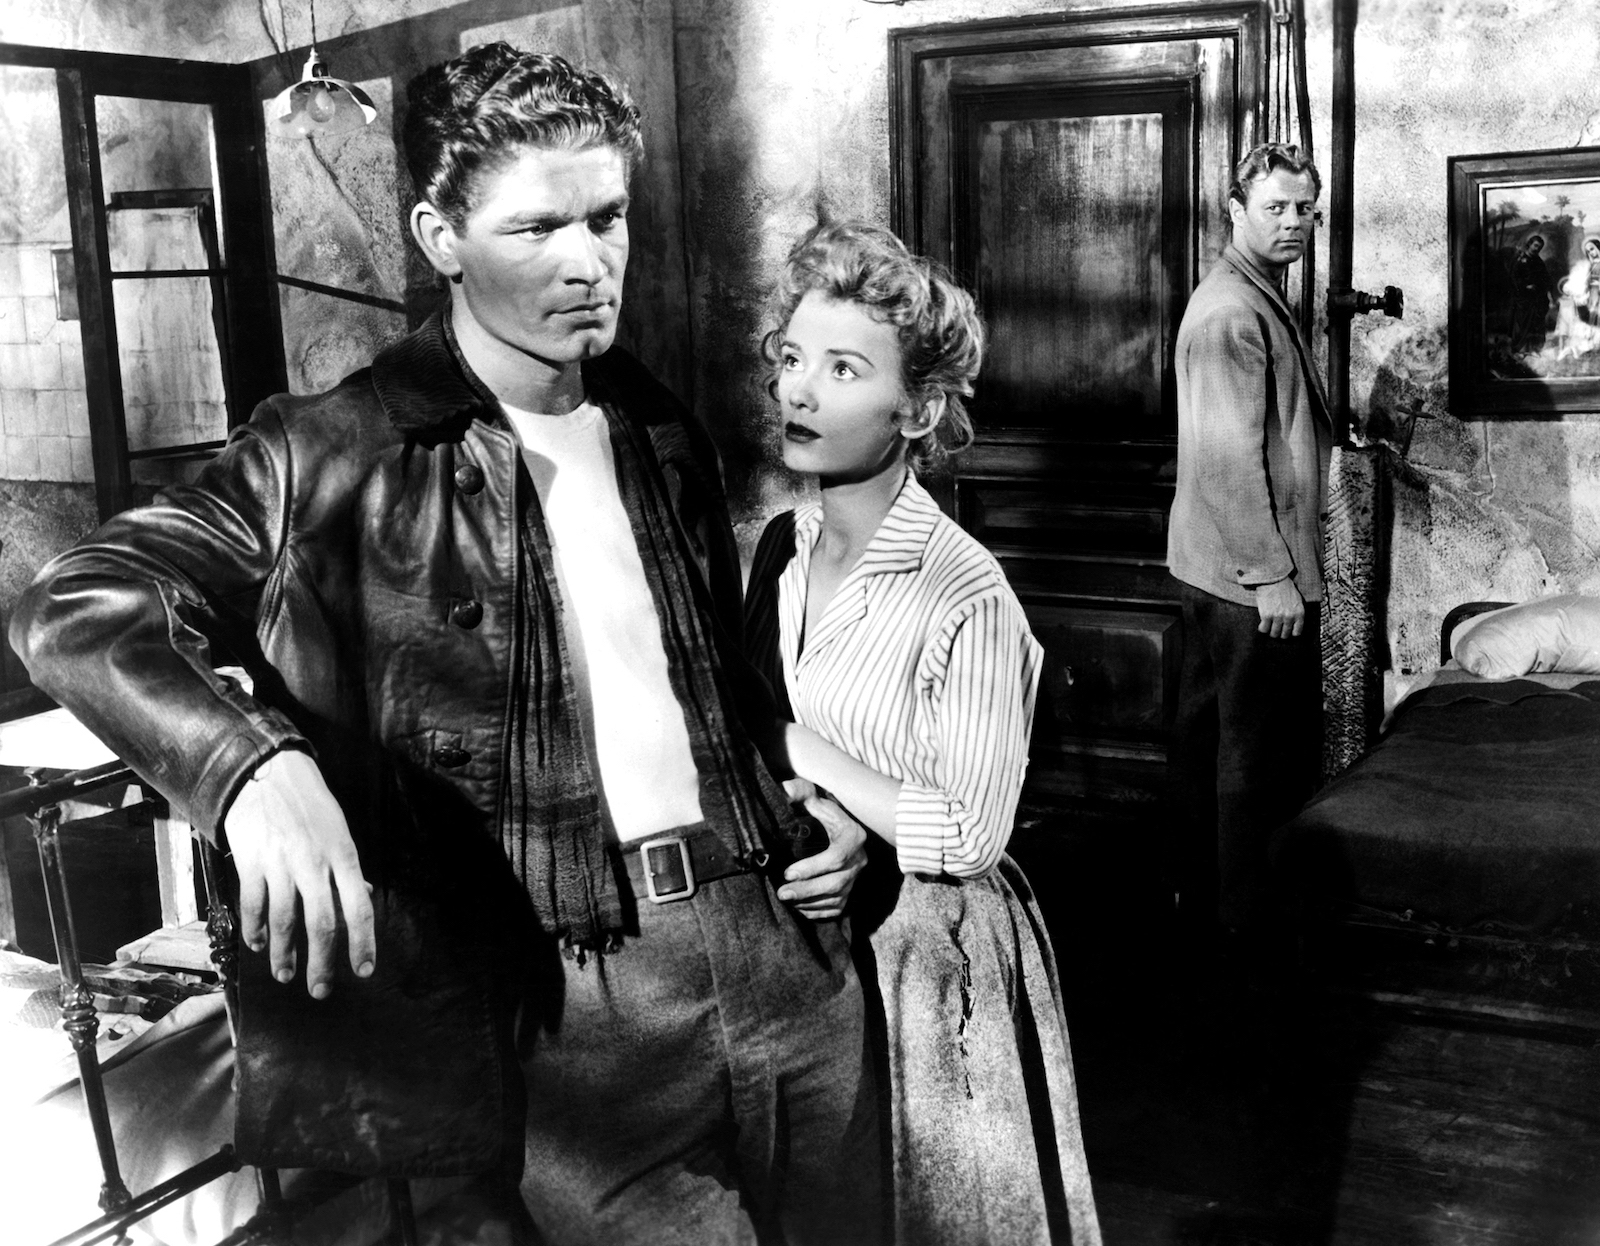 A black-and-white film still of a man staring into space while a woman gazes at him and another man looks on